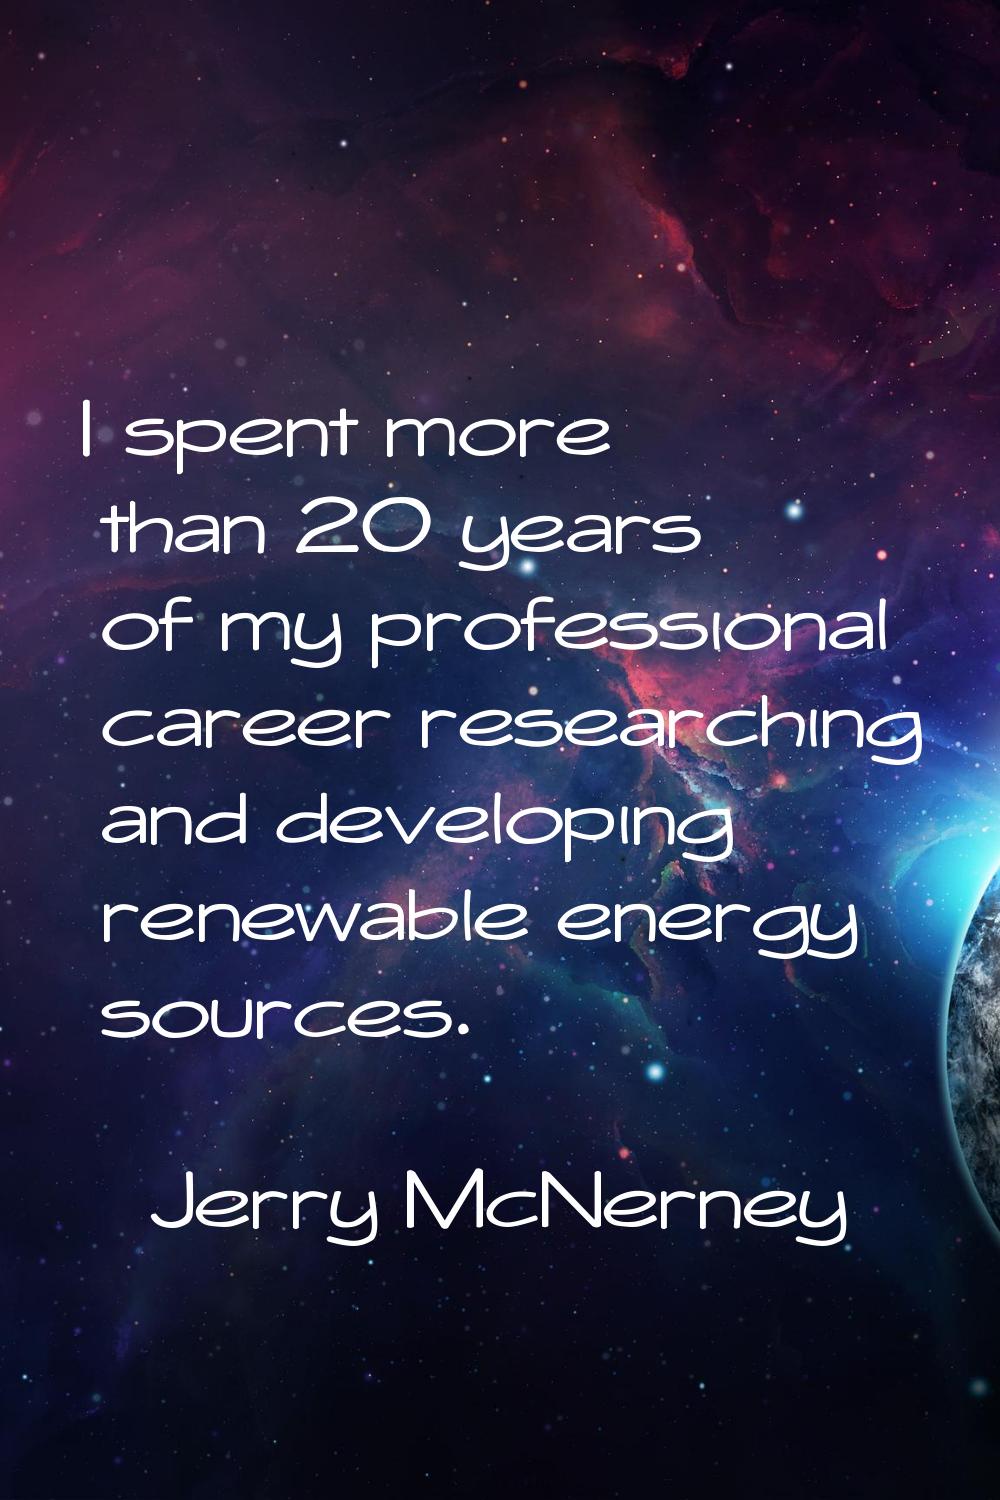 I spent more than 20 years of my professional career researching and developing renewable energy so